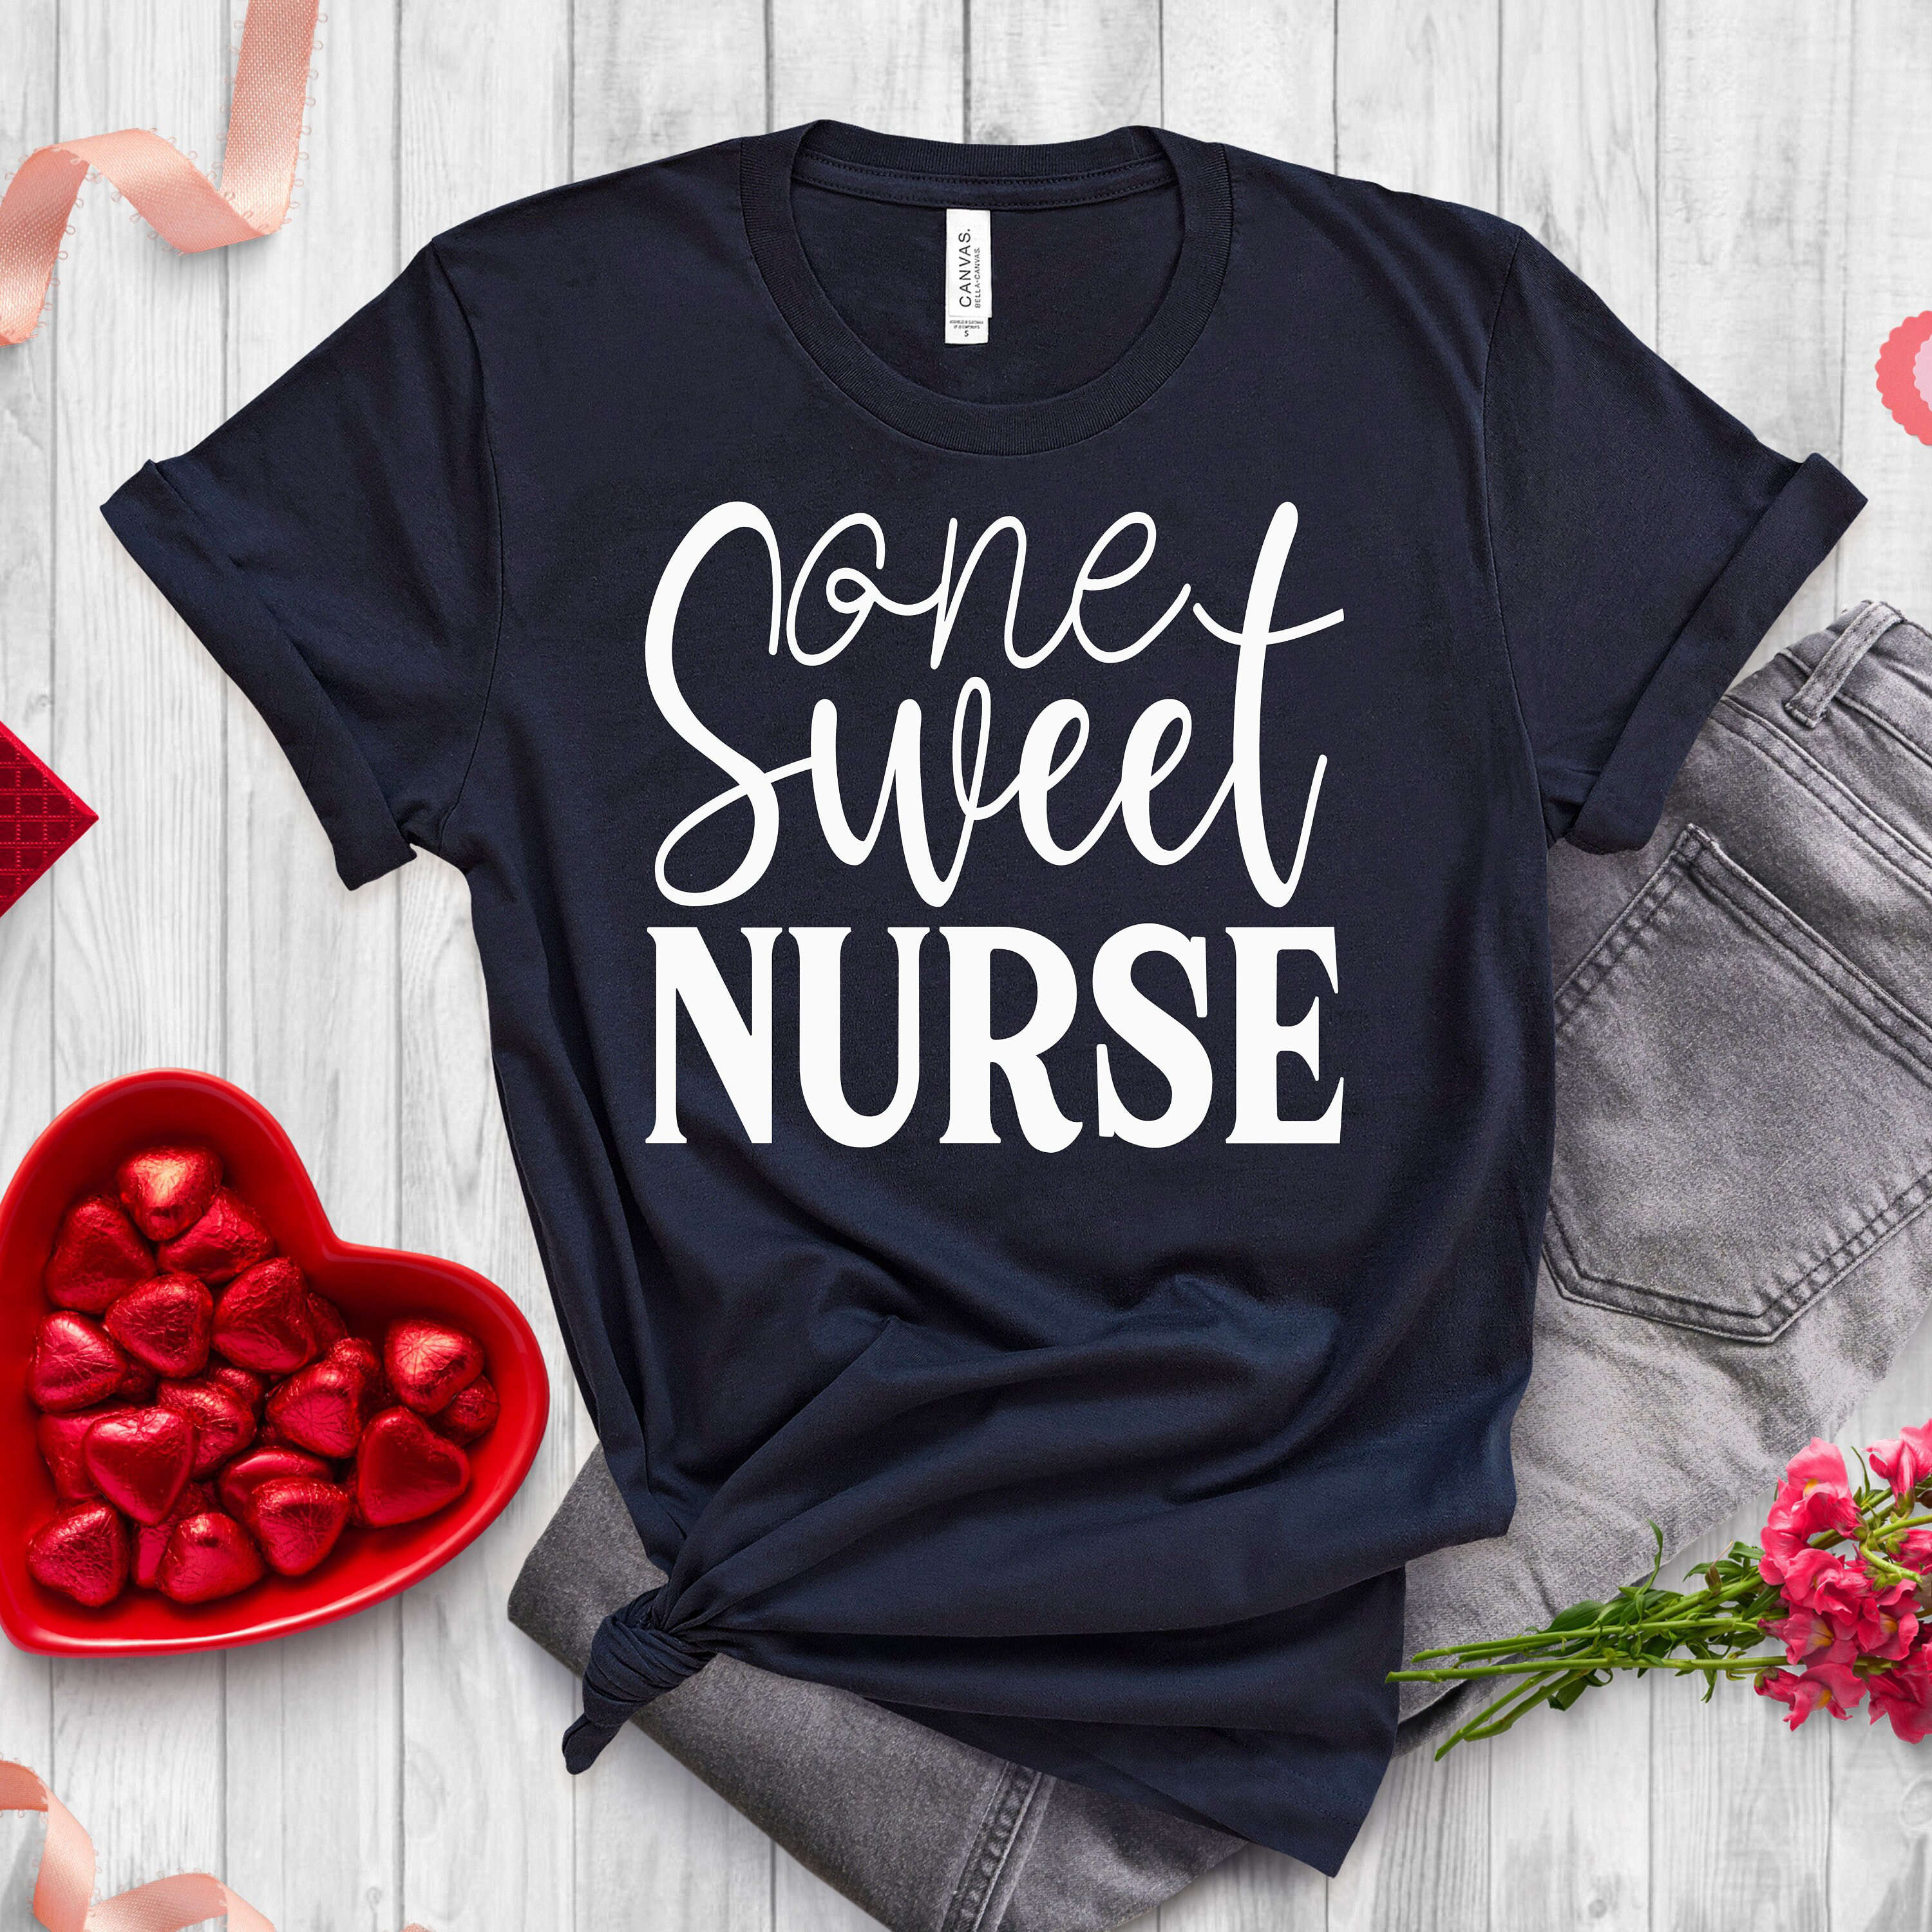 Cute Nurse Valentine s Day Shirt – Perfect Gift for ER Nurses & Healthcare Professionals